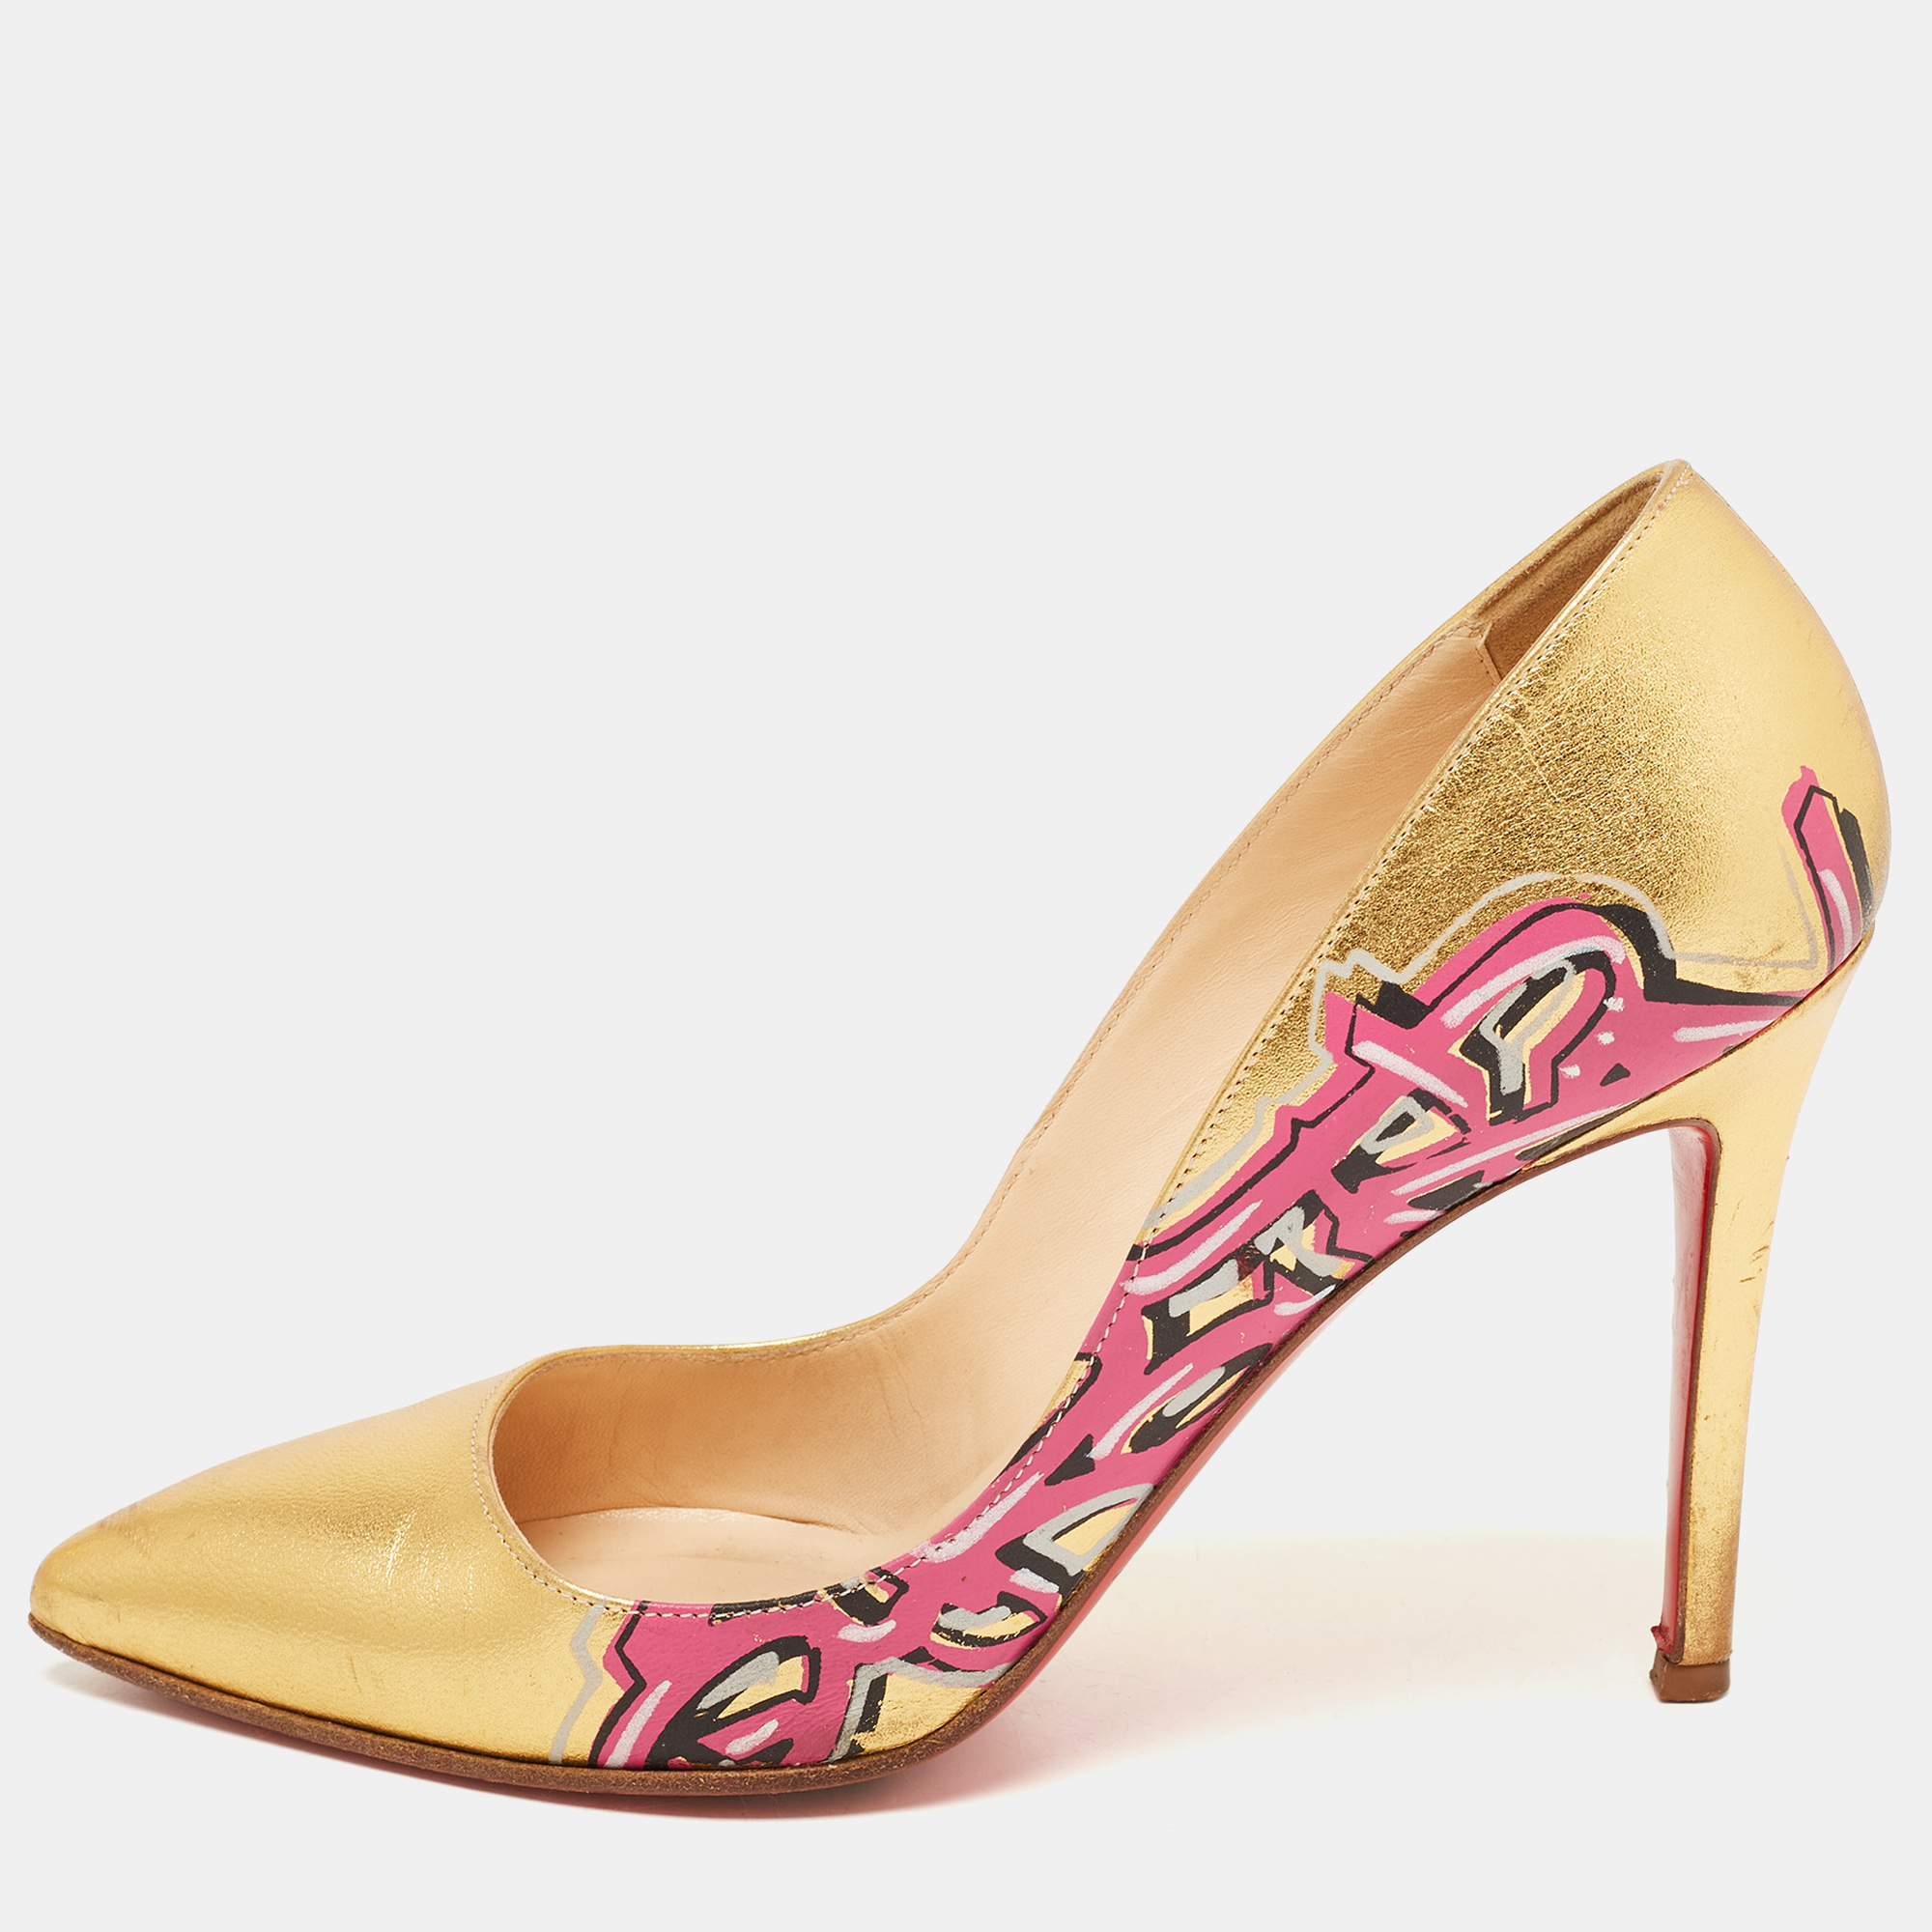 Pre-owned Christian Louboutin Gold Leather Pigalle Graffiti Pumps Size 37.5